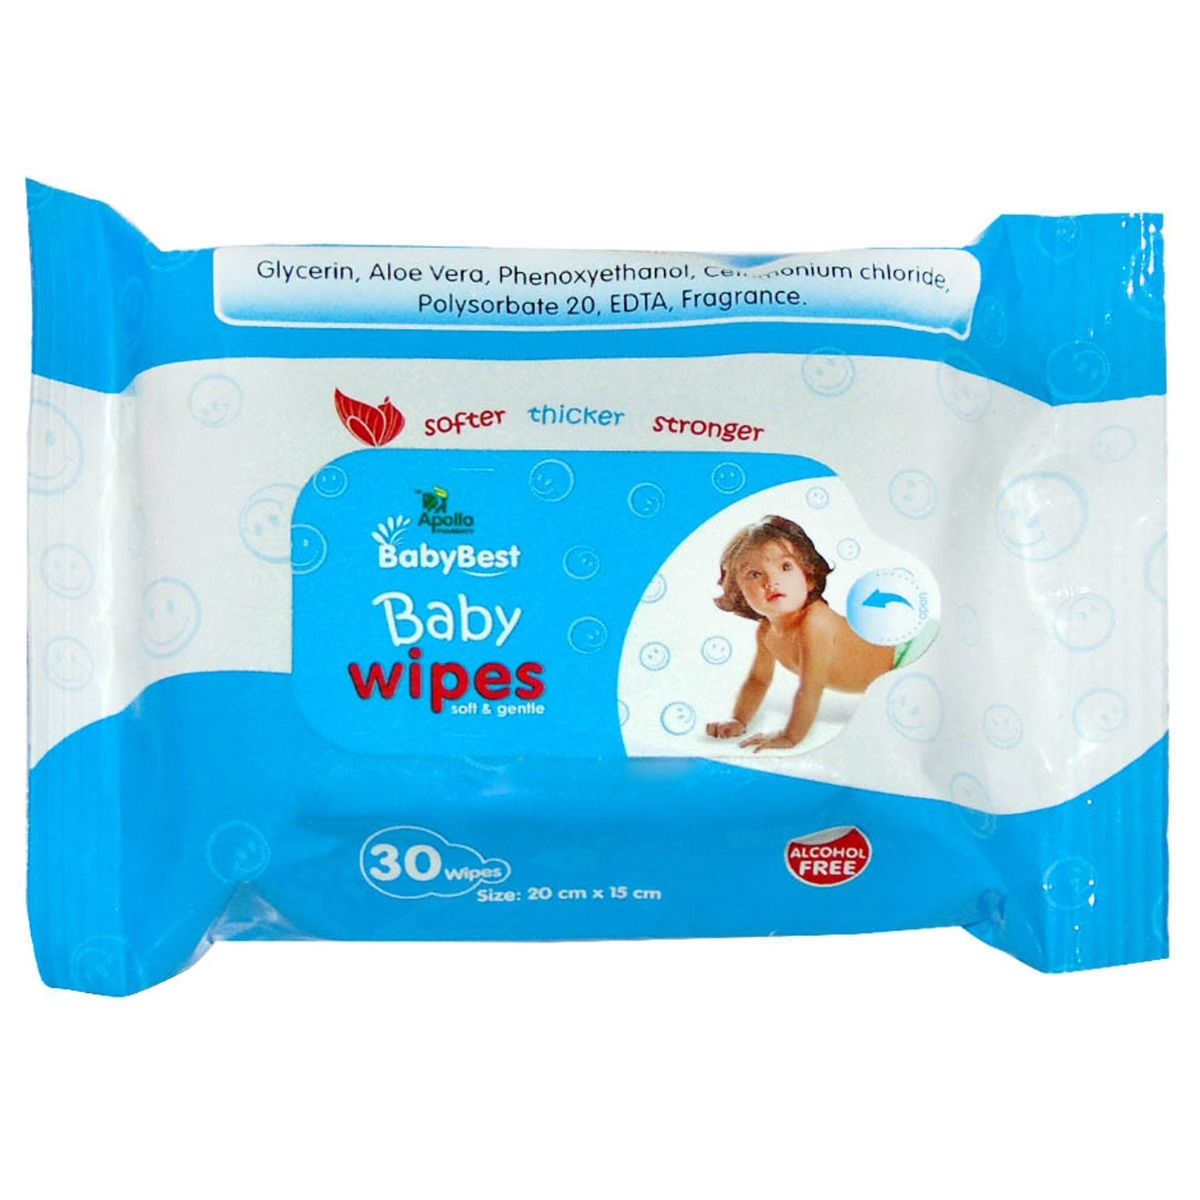 Apollo Pharmacy Baby Best Soft & Gentle Baby Wipes, 30 Count, Pack of 1 